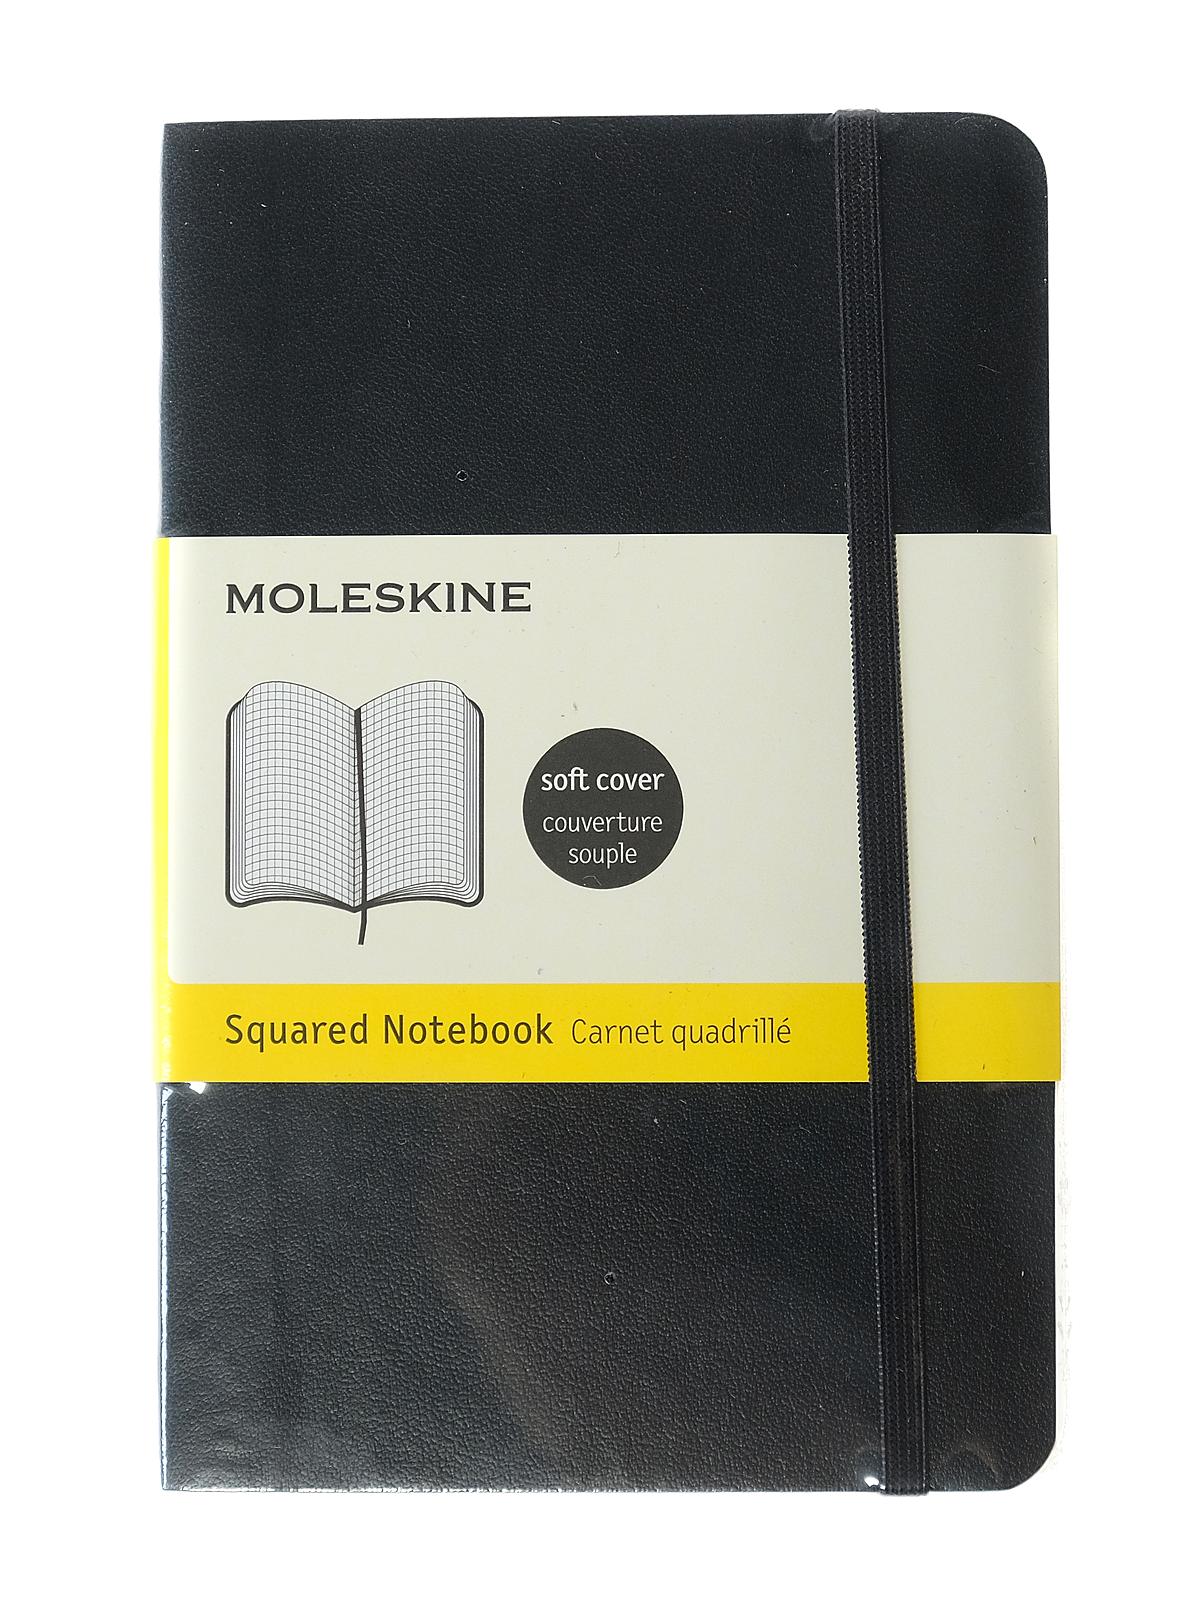 Classic Soft Cover Notebooks Black 3 1 2 In. X 5 1 2 In. 192 Pages, Squared